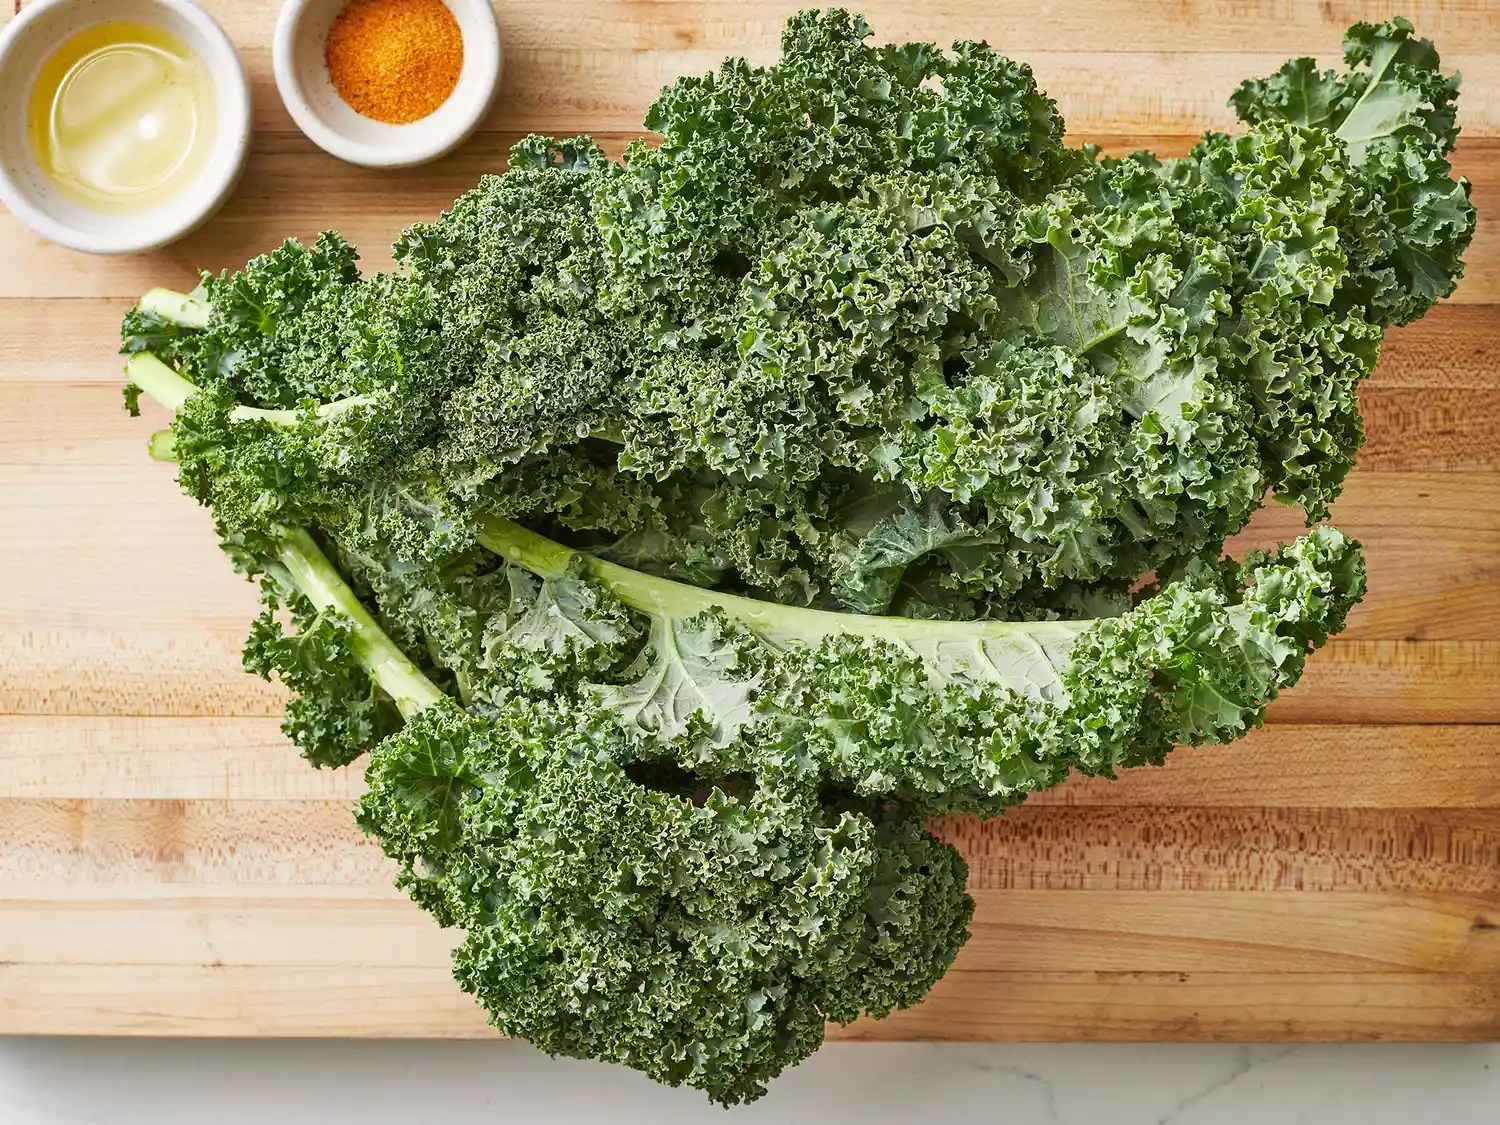 Crispy, addicting Kale Chips – The Ultimate Snack!